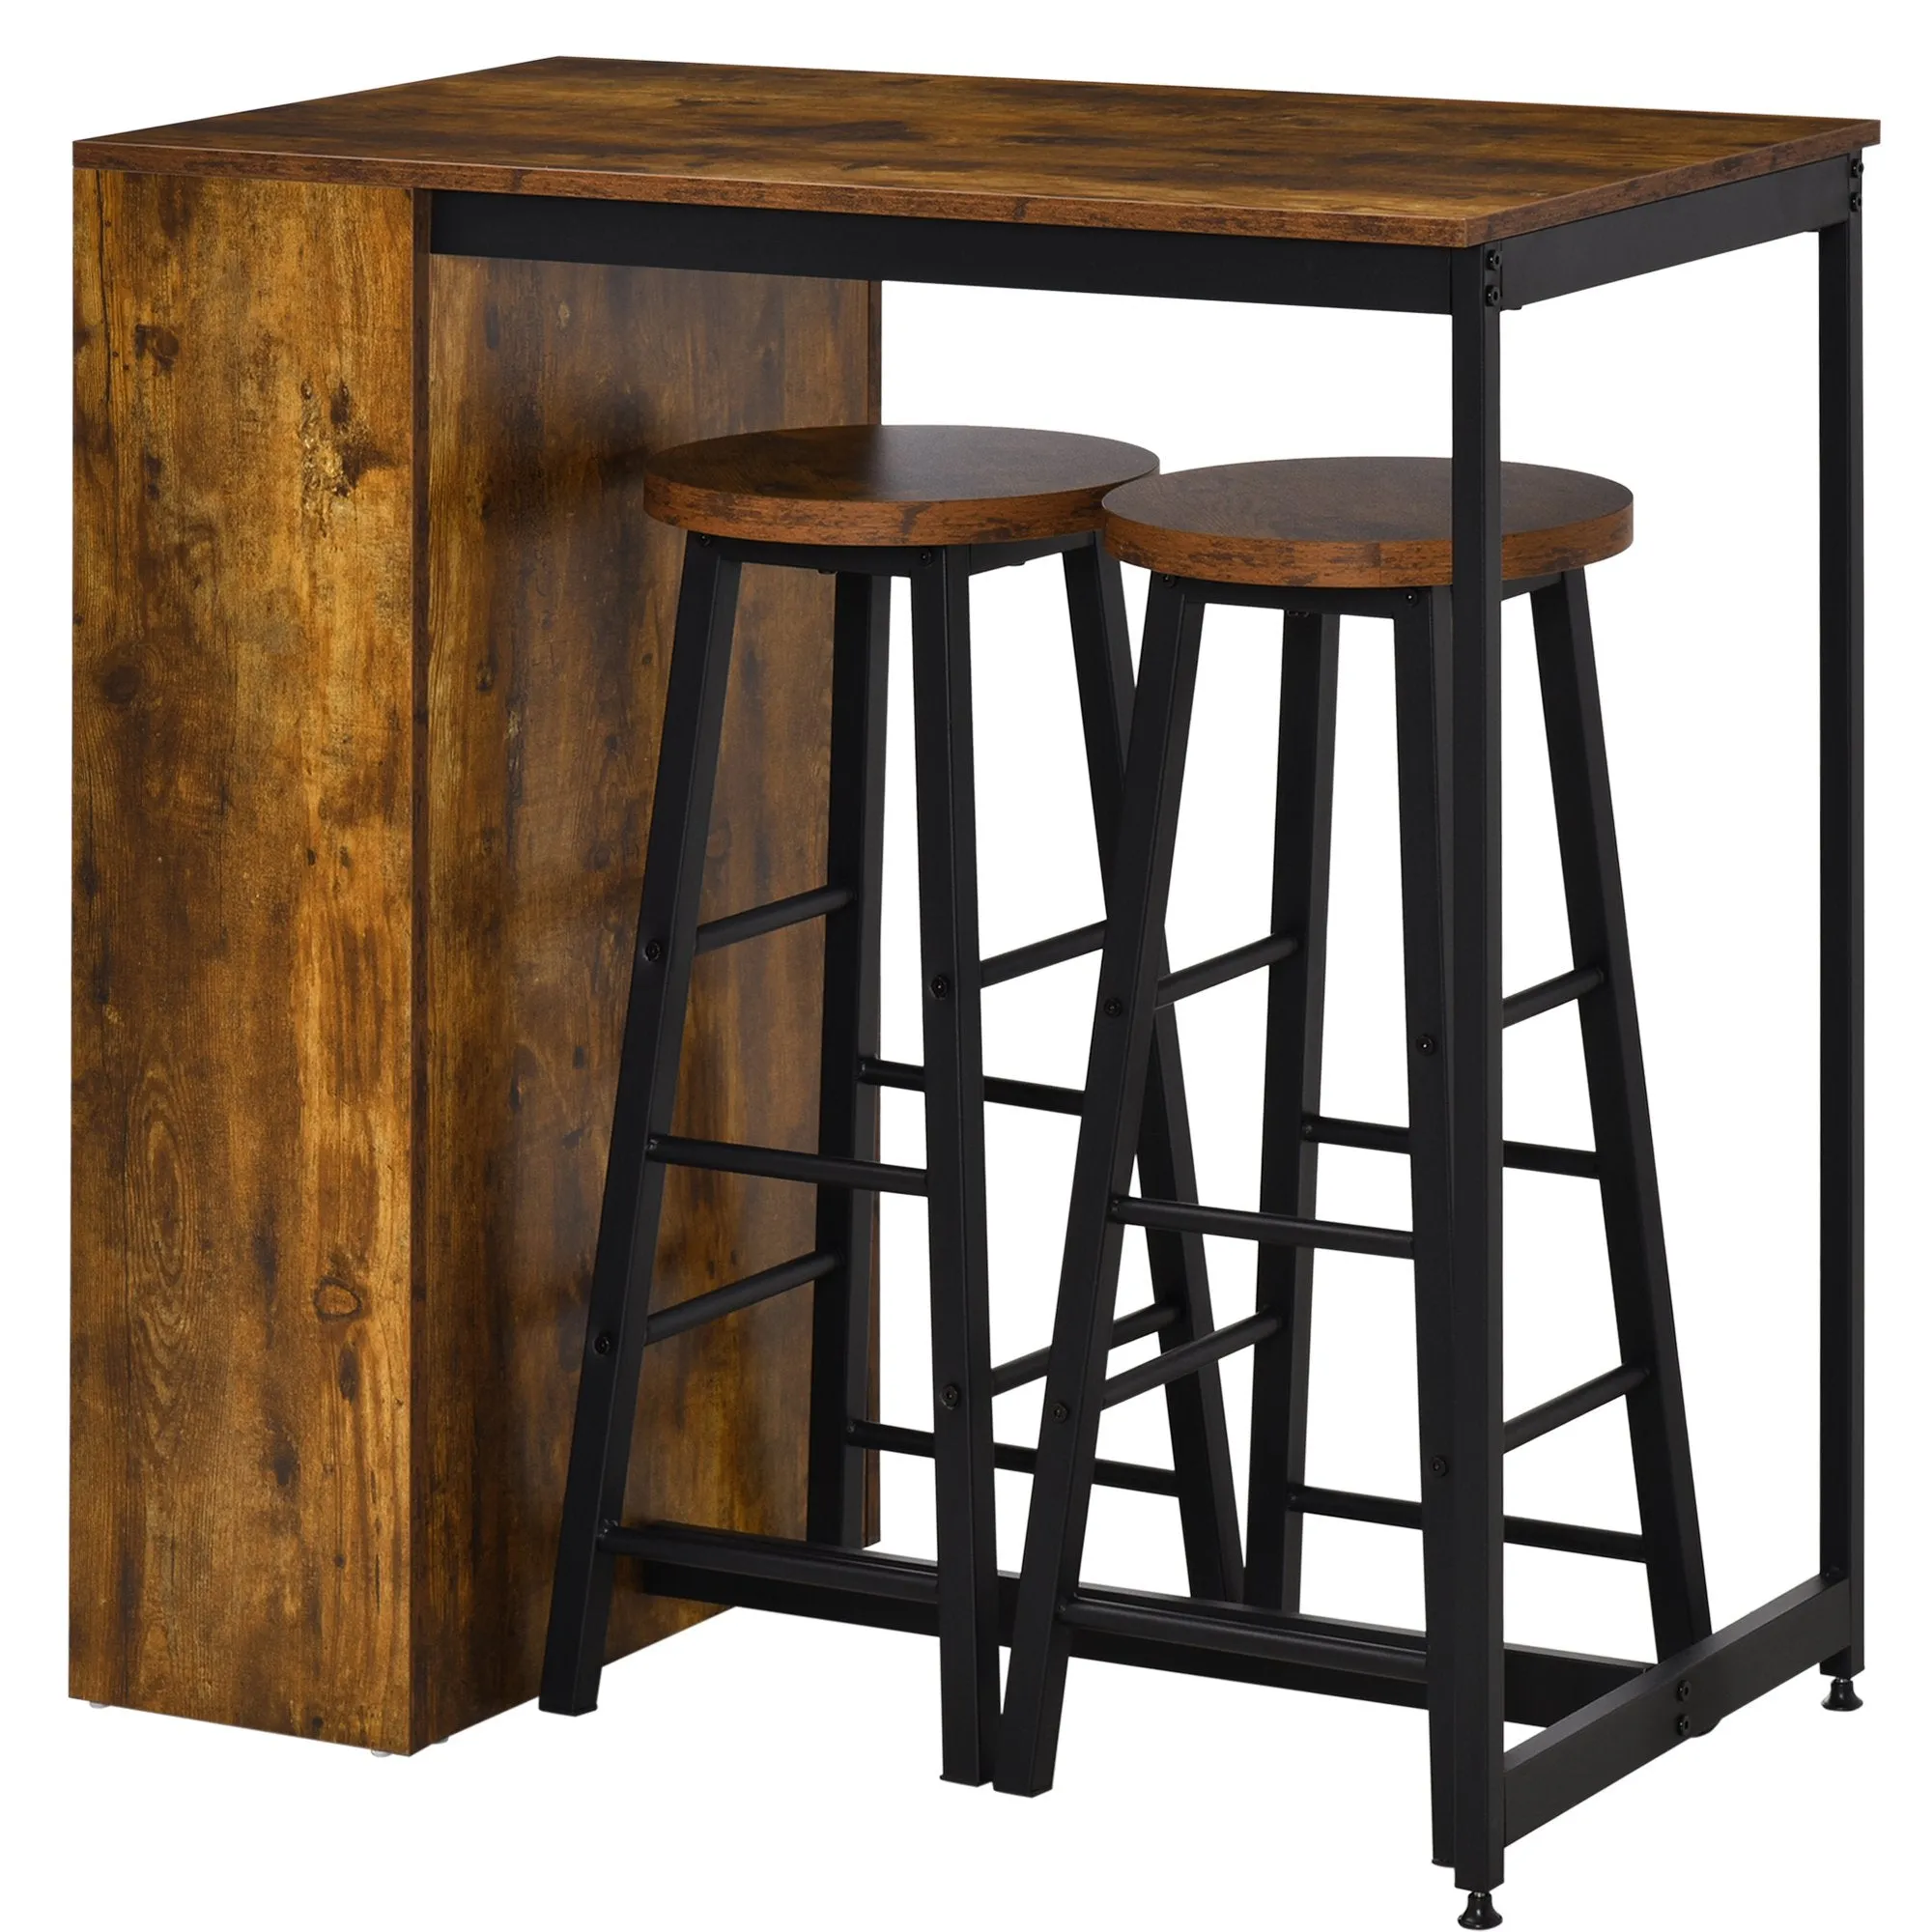 Bar Table and Stools Set, Rustic Brown/Black, 3-Piece with Side Shelf